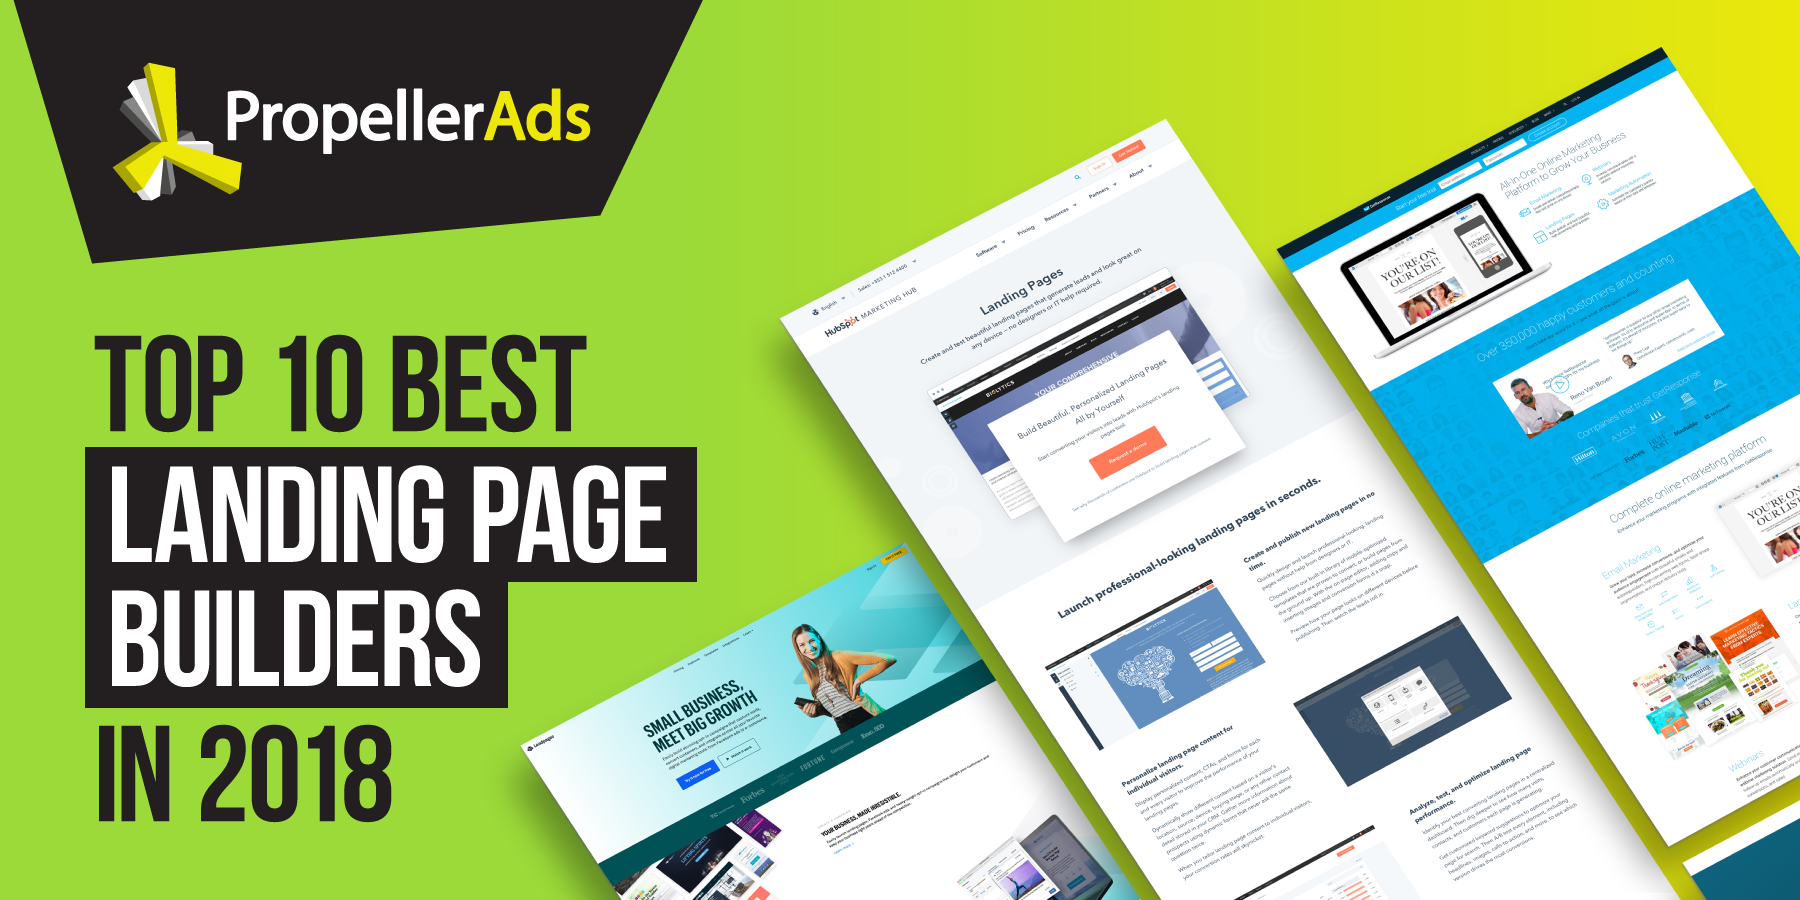 Two things are needed when creating a landing page – a domain and a web hosting account. So covering all aspects of hosting services available to affiliate marketers is quite essential. After all, landing pages are a key part of ad campaigns, at least in the majority of cases. The main idea of a landing